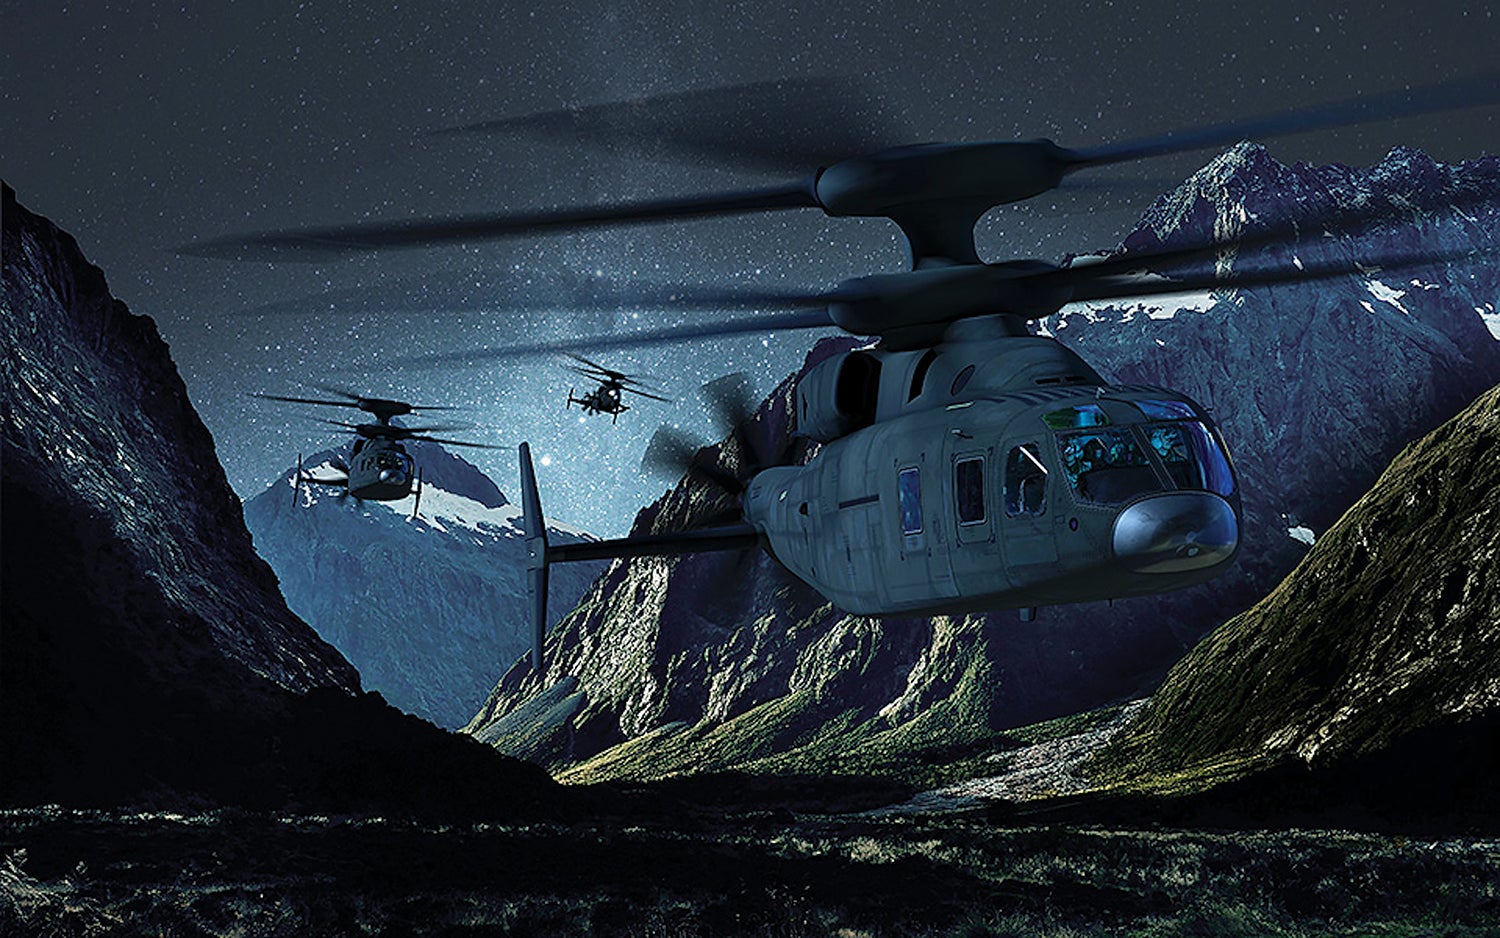 The Sikorsky-Boeing Defiant X is one of two aircraft competing for the Army’s Future Long-Range Assault Aircraft program. (Credit: Boeing Co. Image)